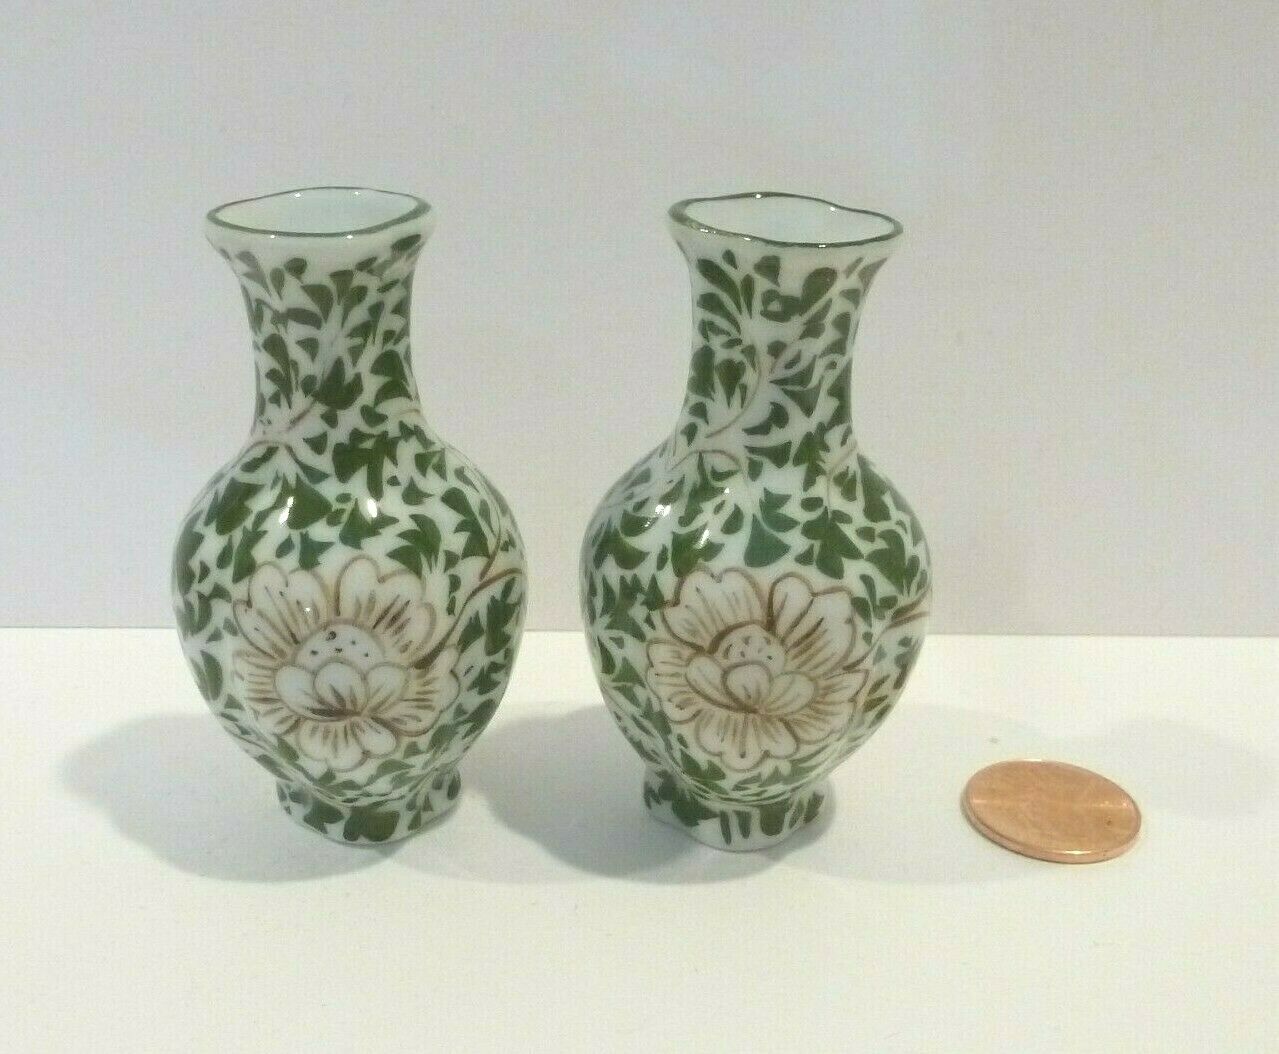 Dollhouse Miniature Large Vases Green & White With Flower Design 2 1/2" Tall